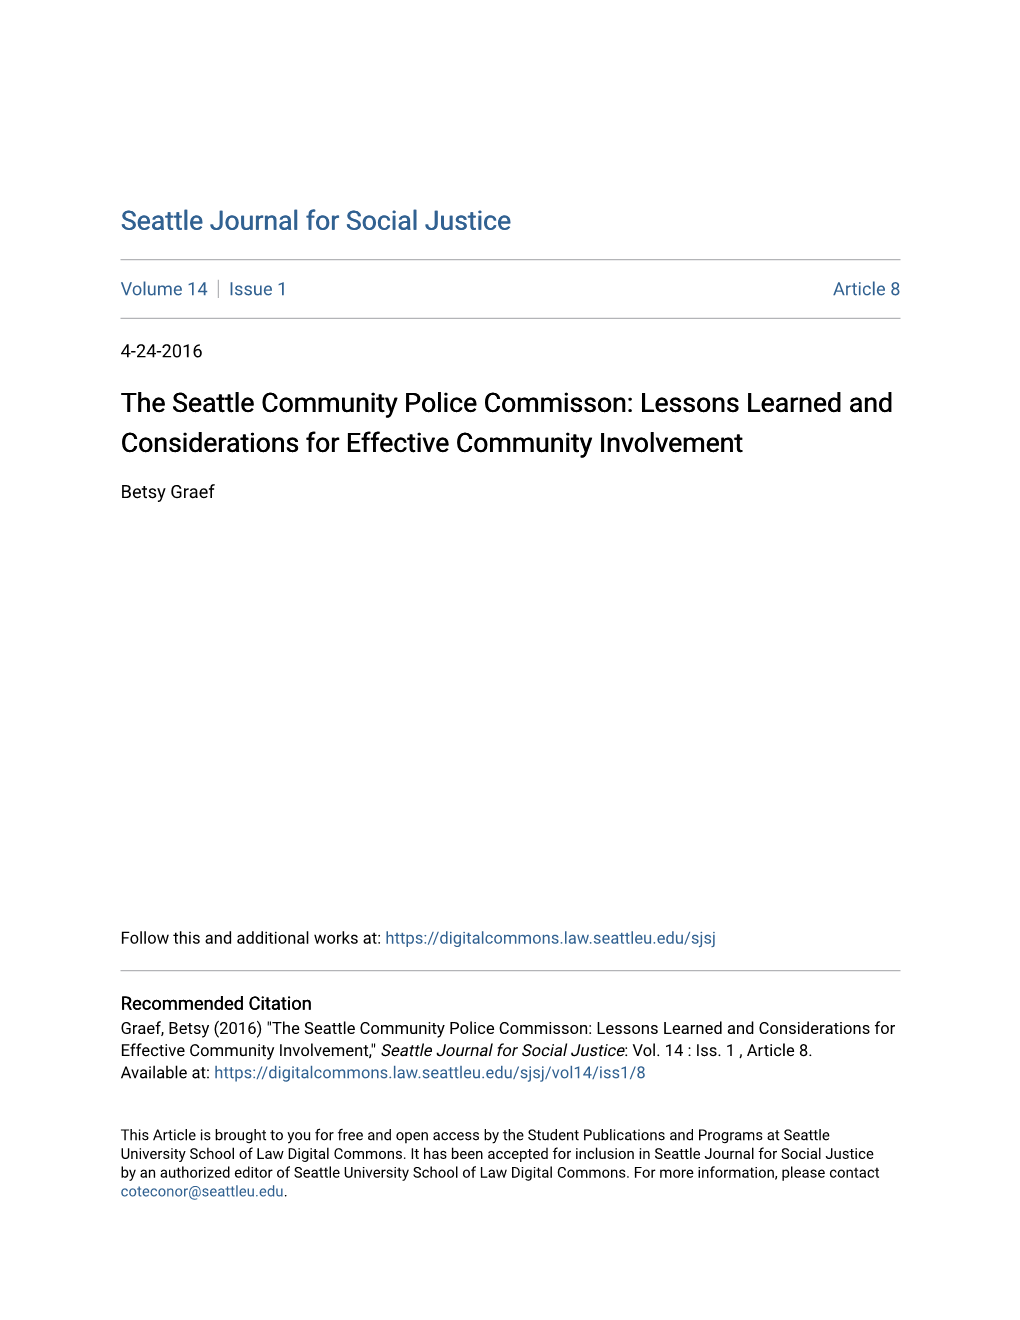 The Seattle Community Police Commisson: Lessons Learned and Considerations for Effective Community Involvement